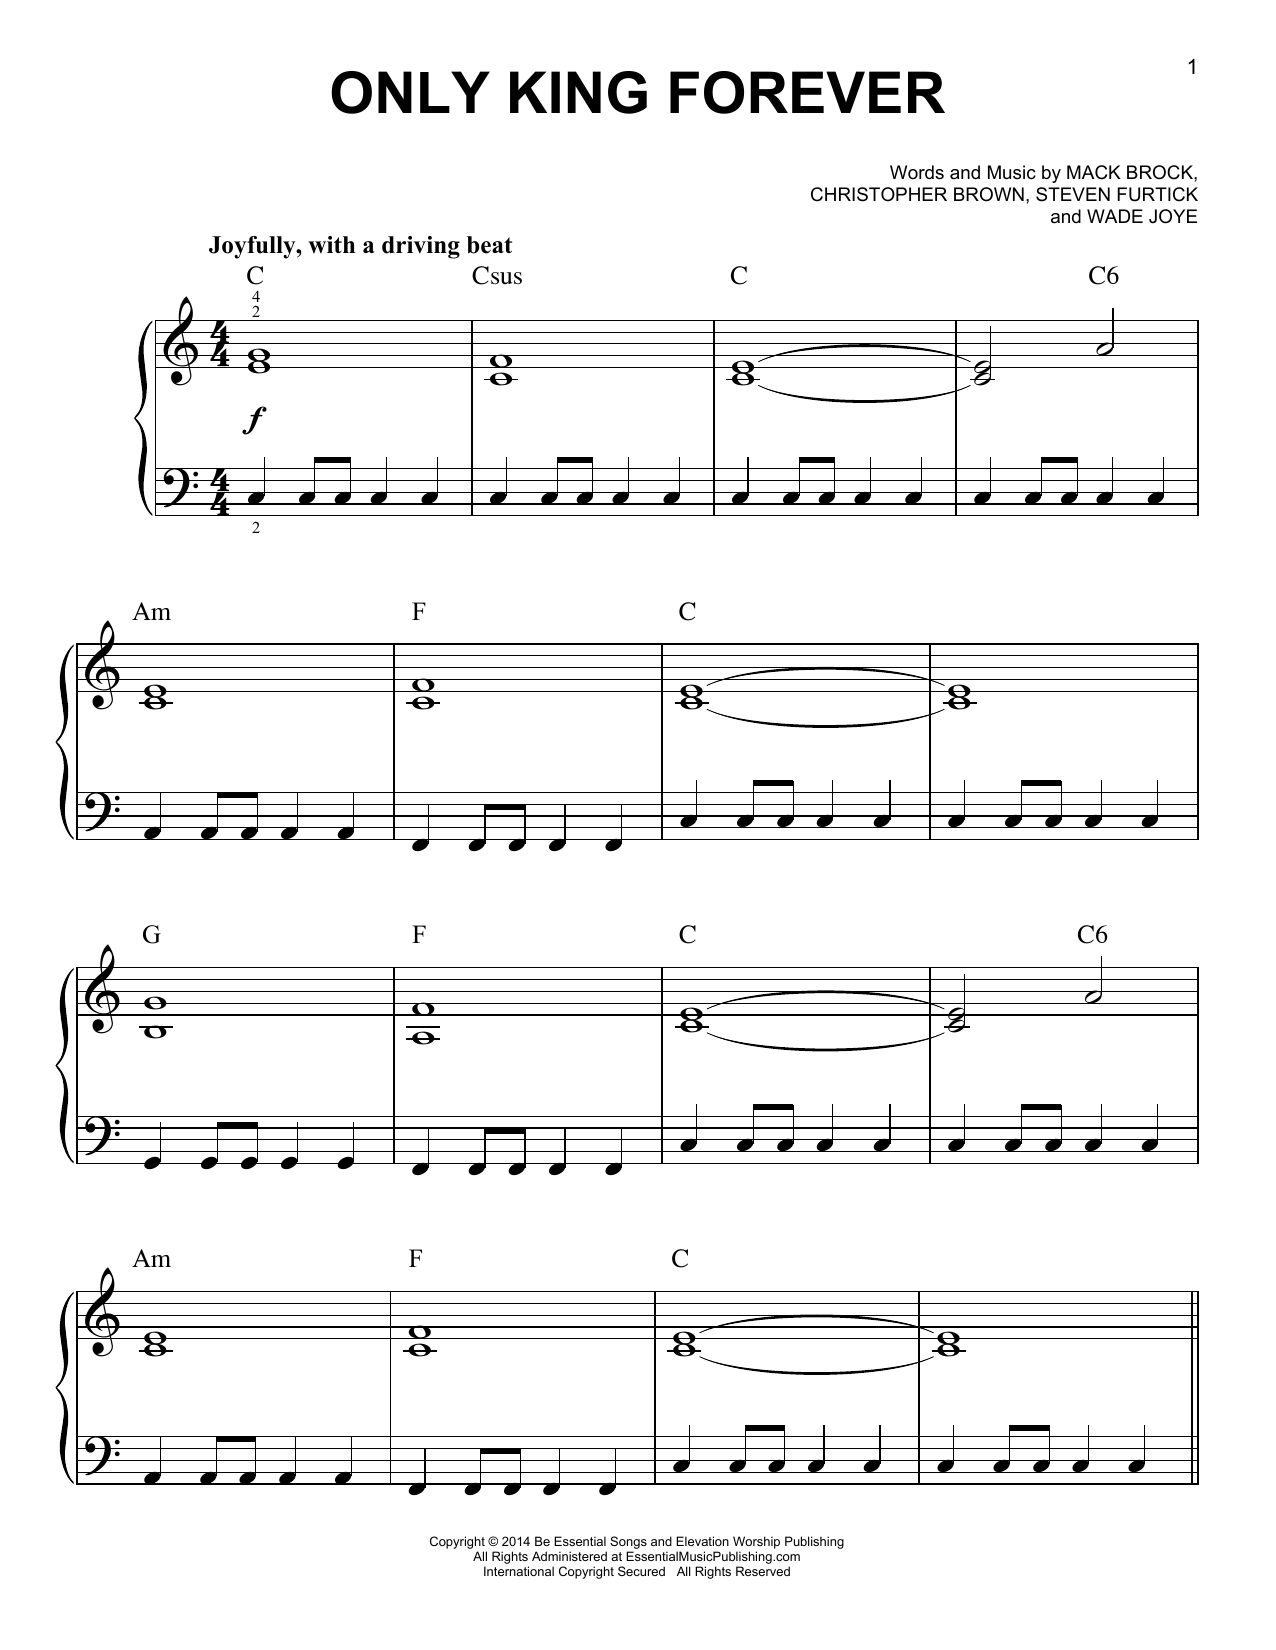 Download Elevation Worship Only King Forever Sheet Music